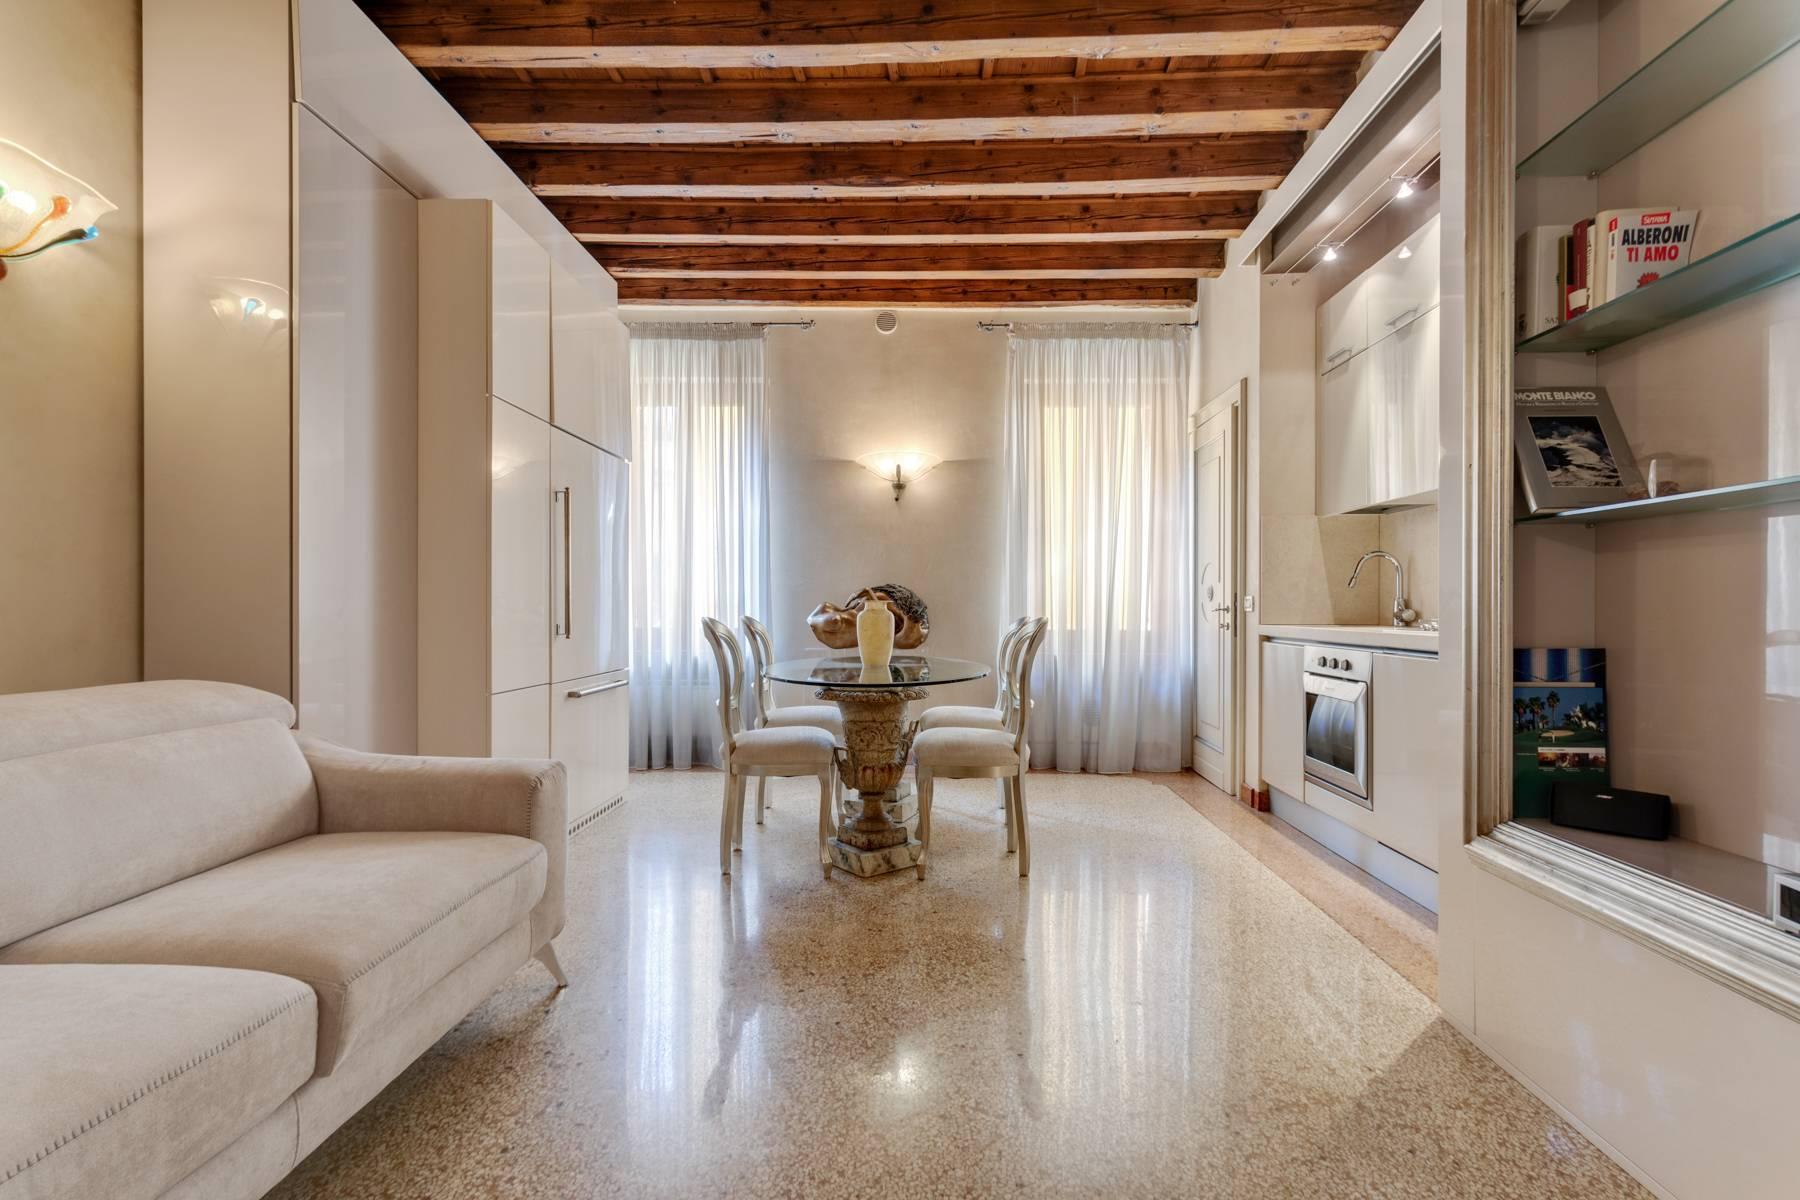 Exquisite apartment just few steps away from Piazza delle Erbe - 2